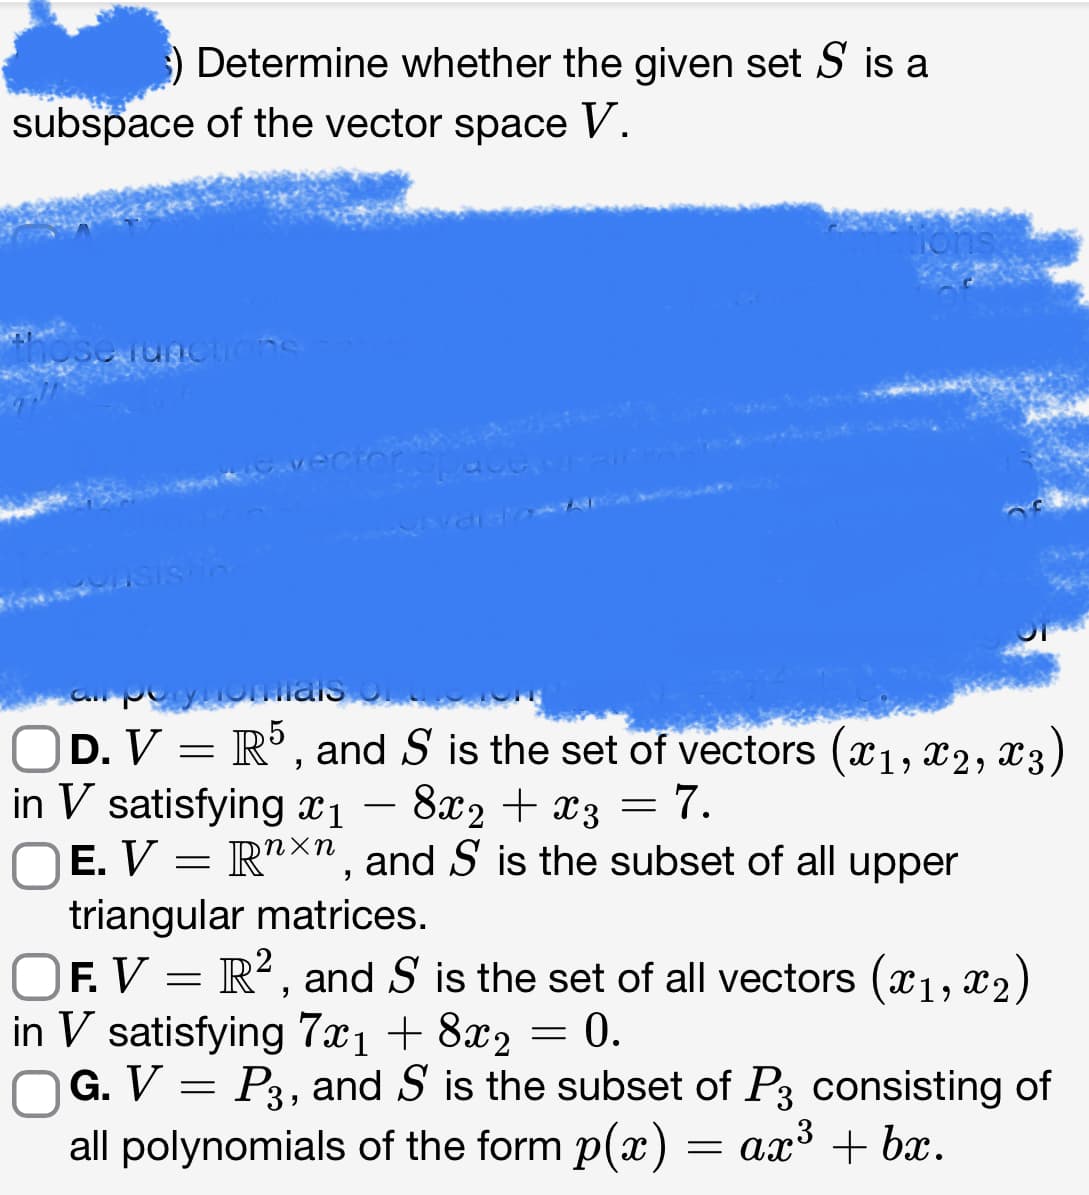 ) Determine whether the given set S is a
subspace of the vector space V.
Se functions
cro
OD. V = R5, and S is the set of vectors (1, 2, 3)
in V satisfying x1
8x₂ + x3 = 7.
ηχη
E. V Rnxn, and S is the subset of all upper
=
triangular matrices.
OF. V = R2, and S is the set of all vectors (x1, x2)
in V satisfying 7x₁ + 8x₂ = 0.
G. V = P3, and S is the subset of P3 consisting of
all polynomials of the form p(x) = ax³ + bx.